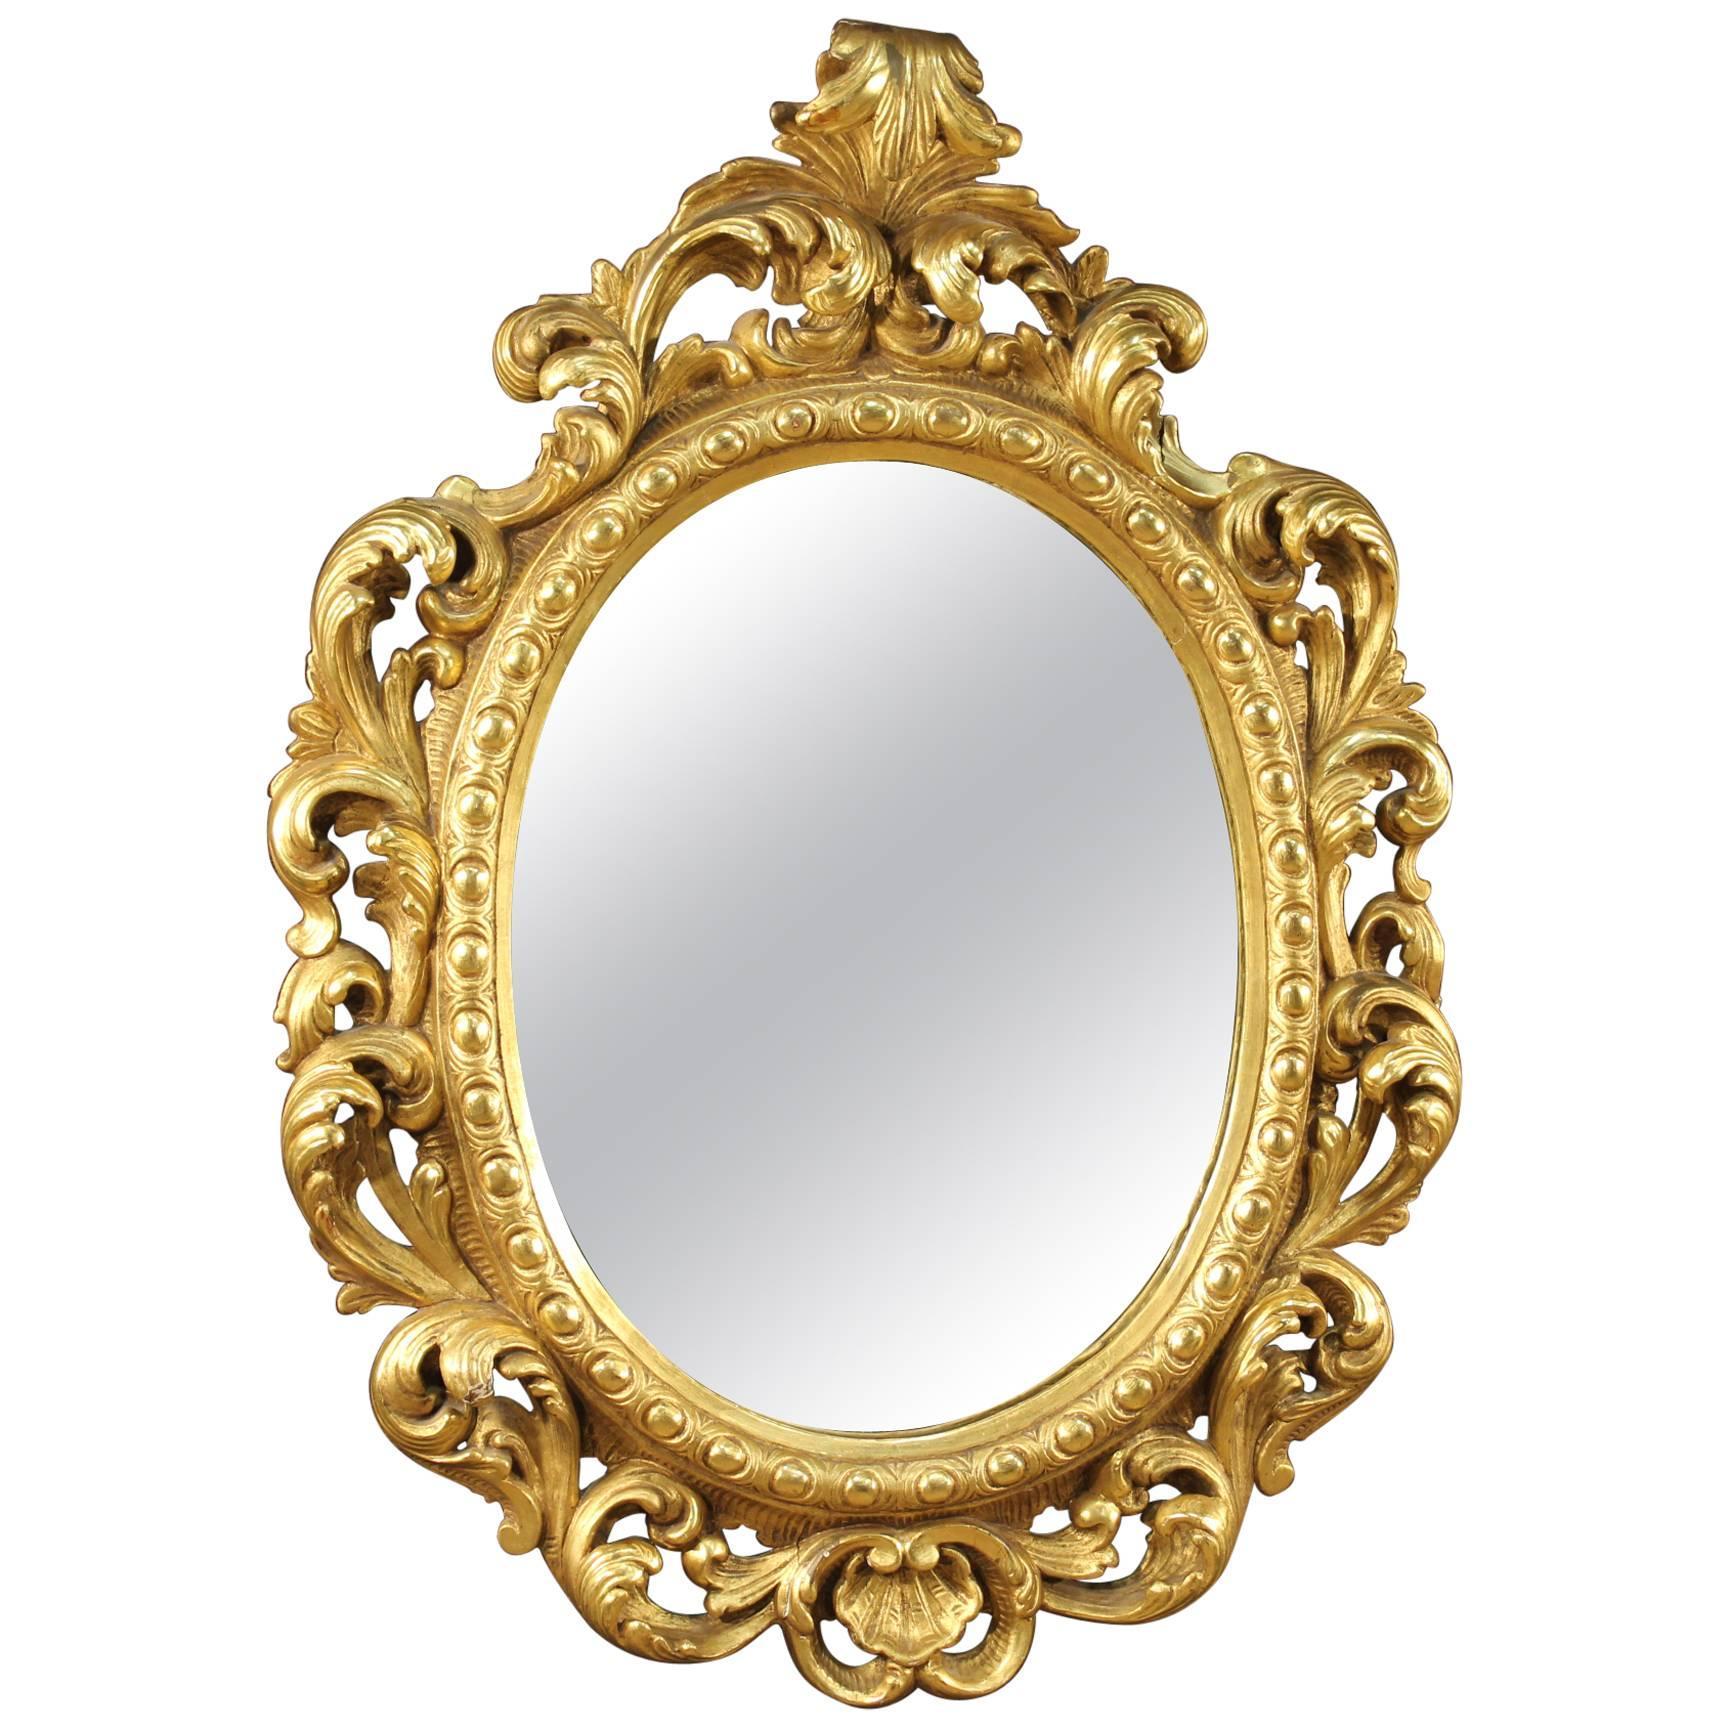 Early 20th Century Mirror Made by Giltwood